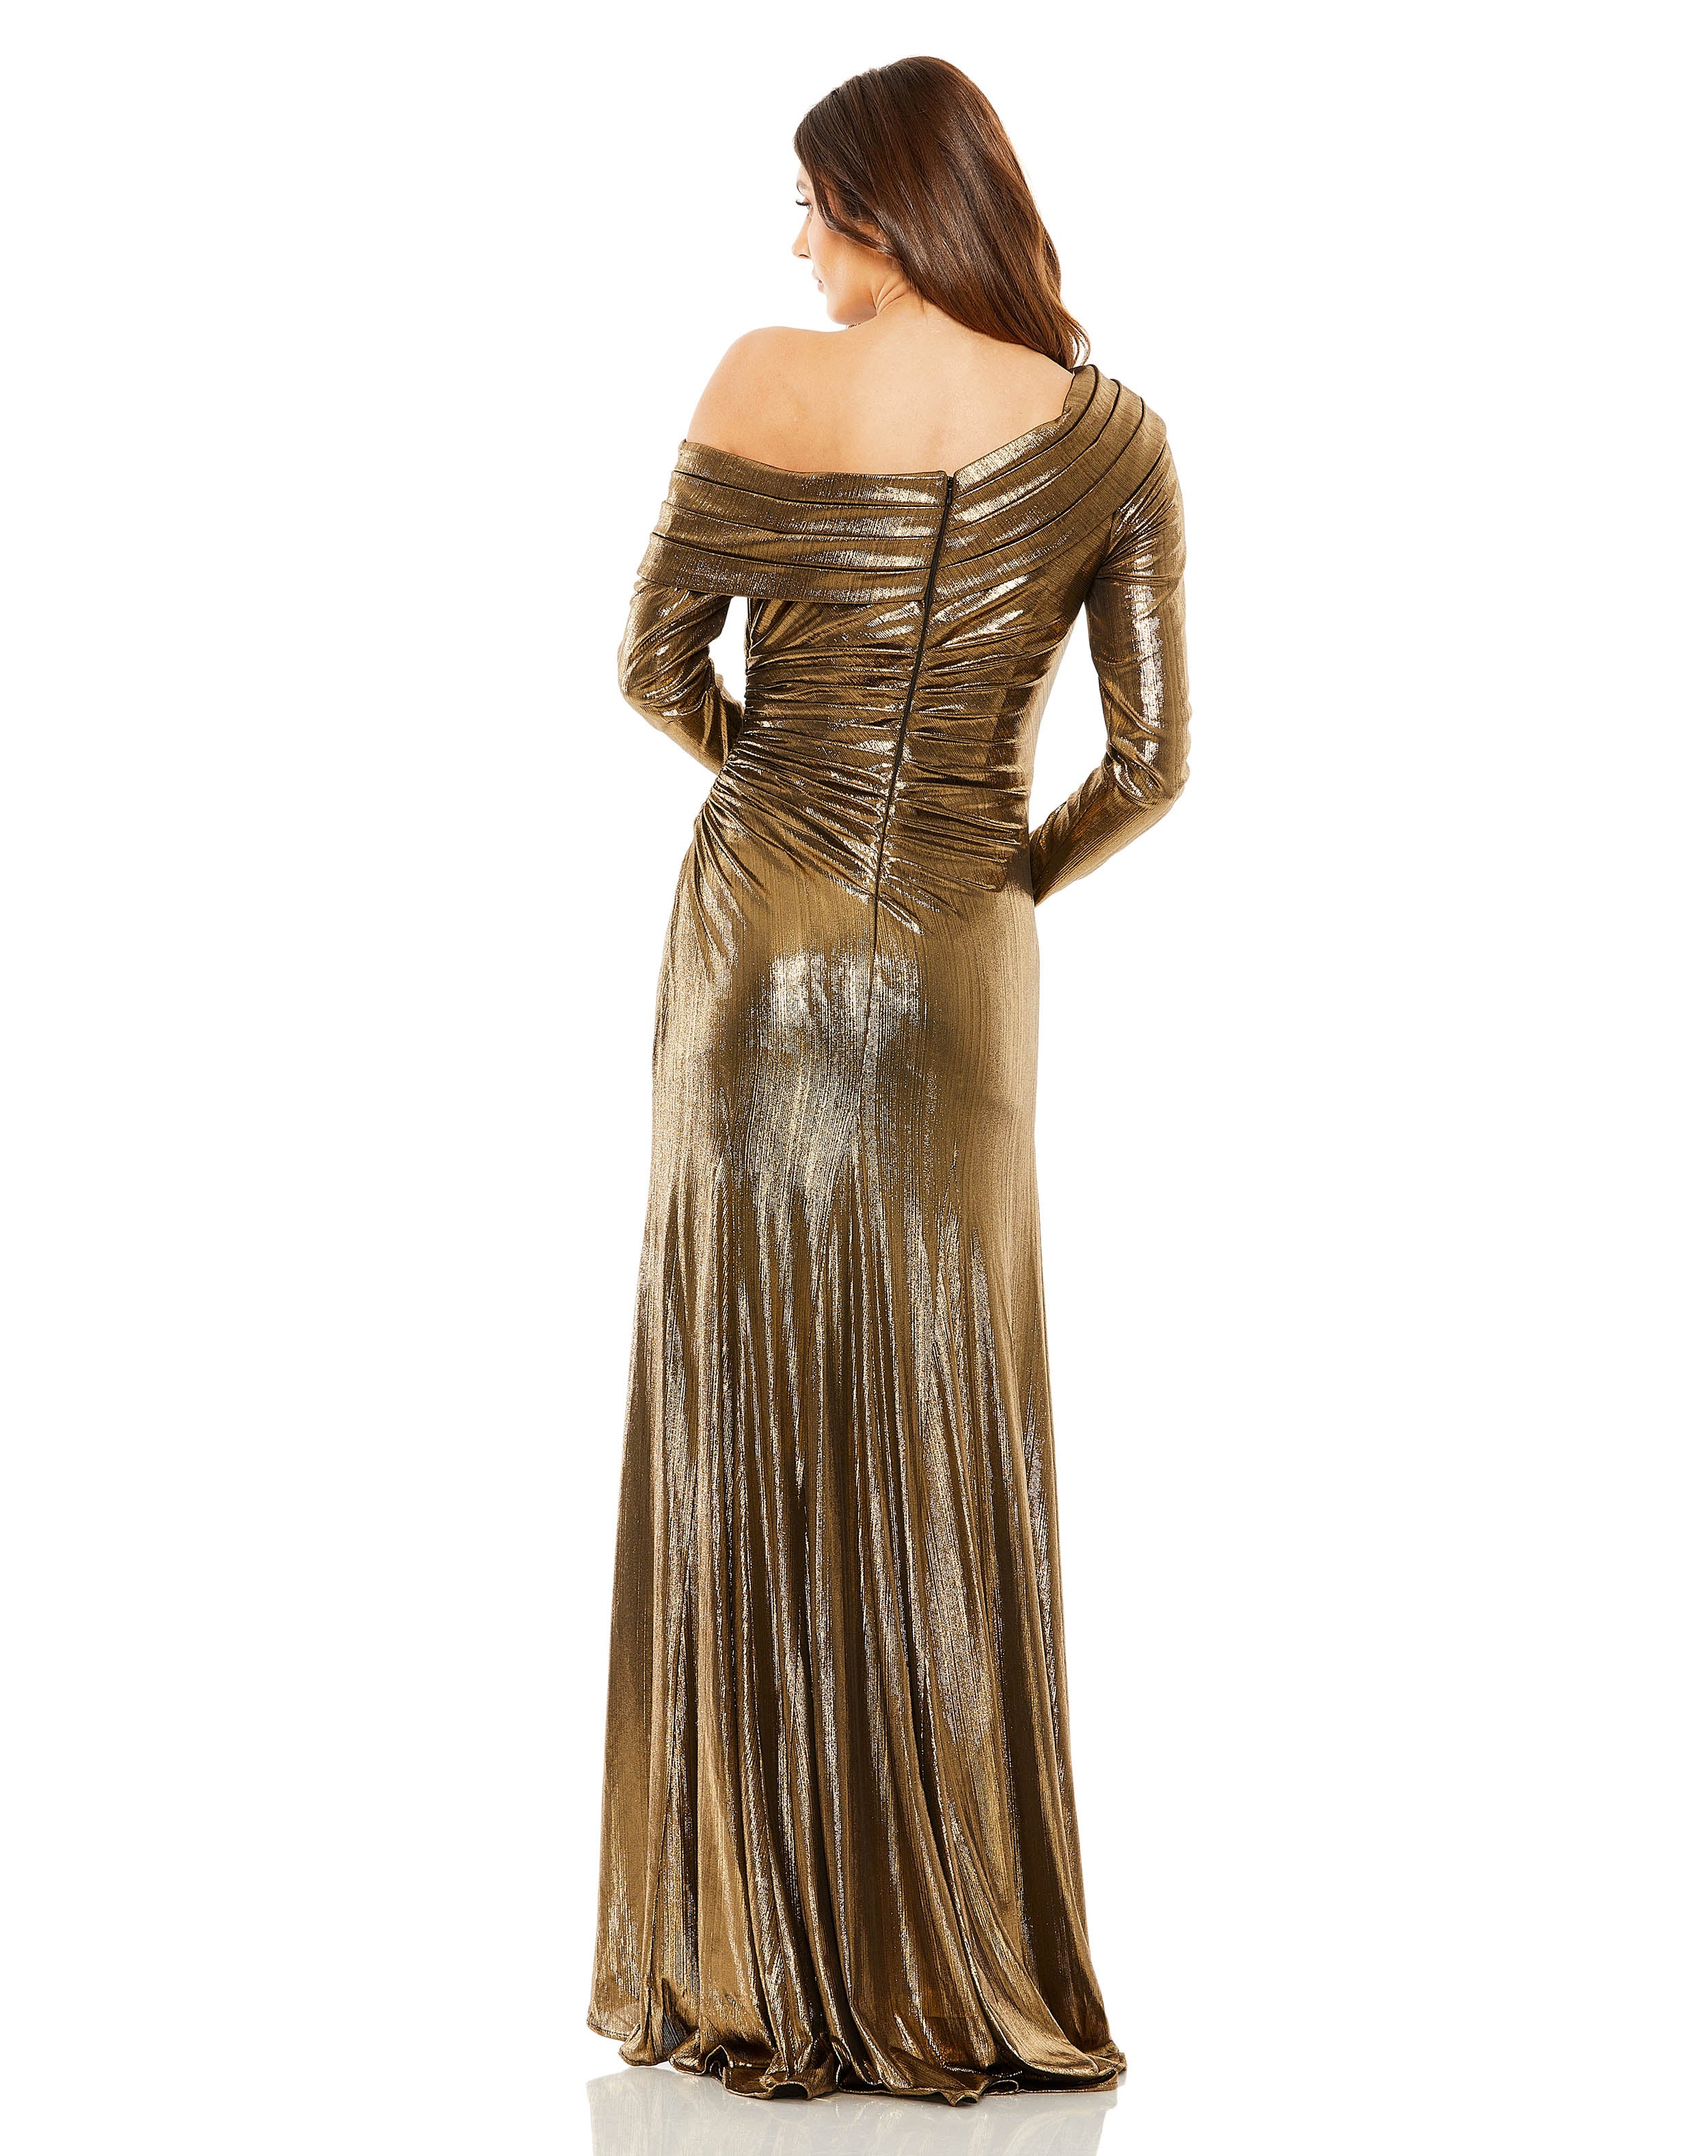 Long Sleeve Off the Shoulder Metallic Gown